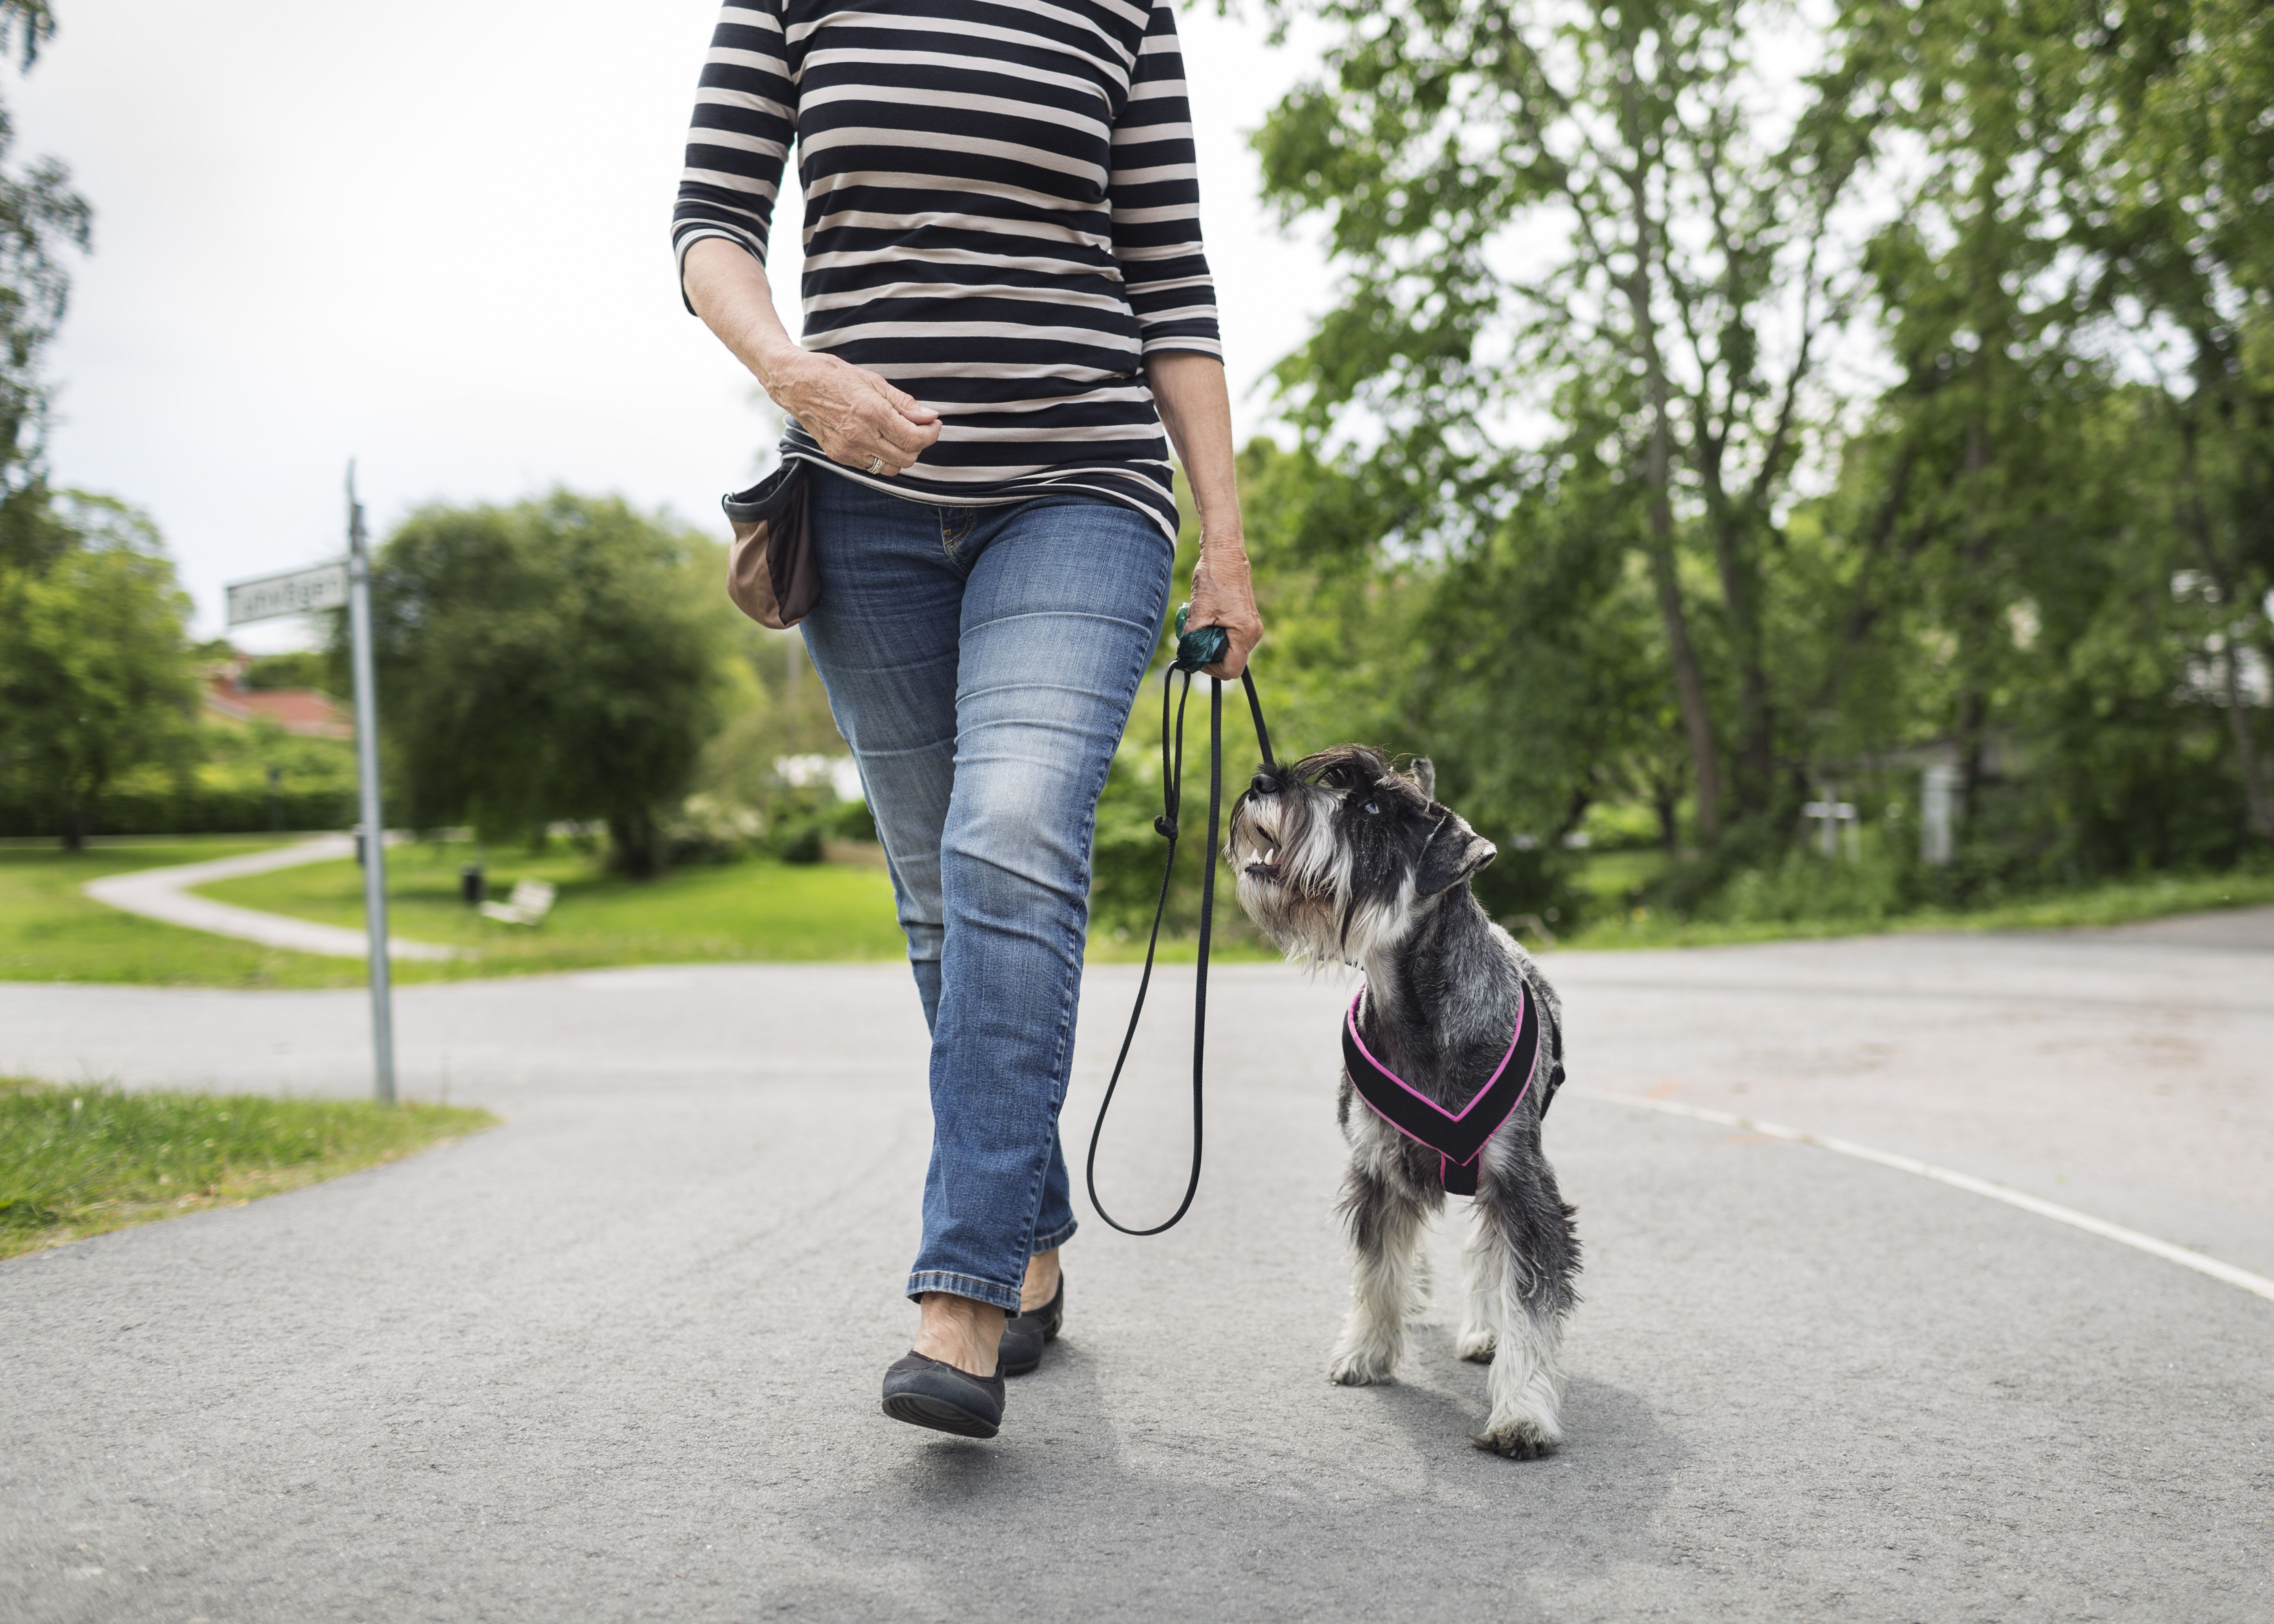 Woman walking down a road with a dog on a leash.